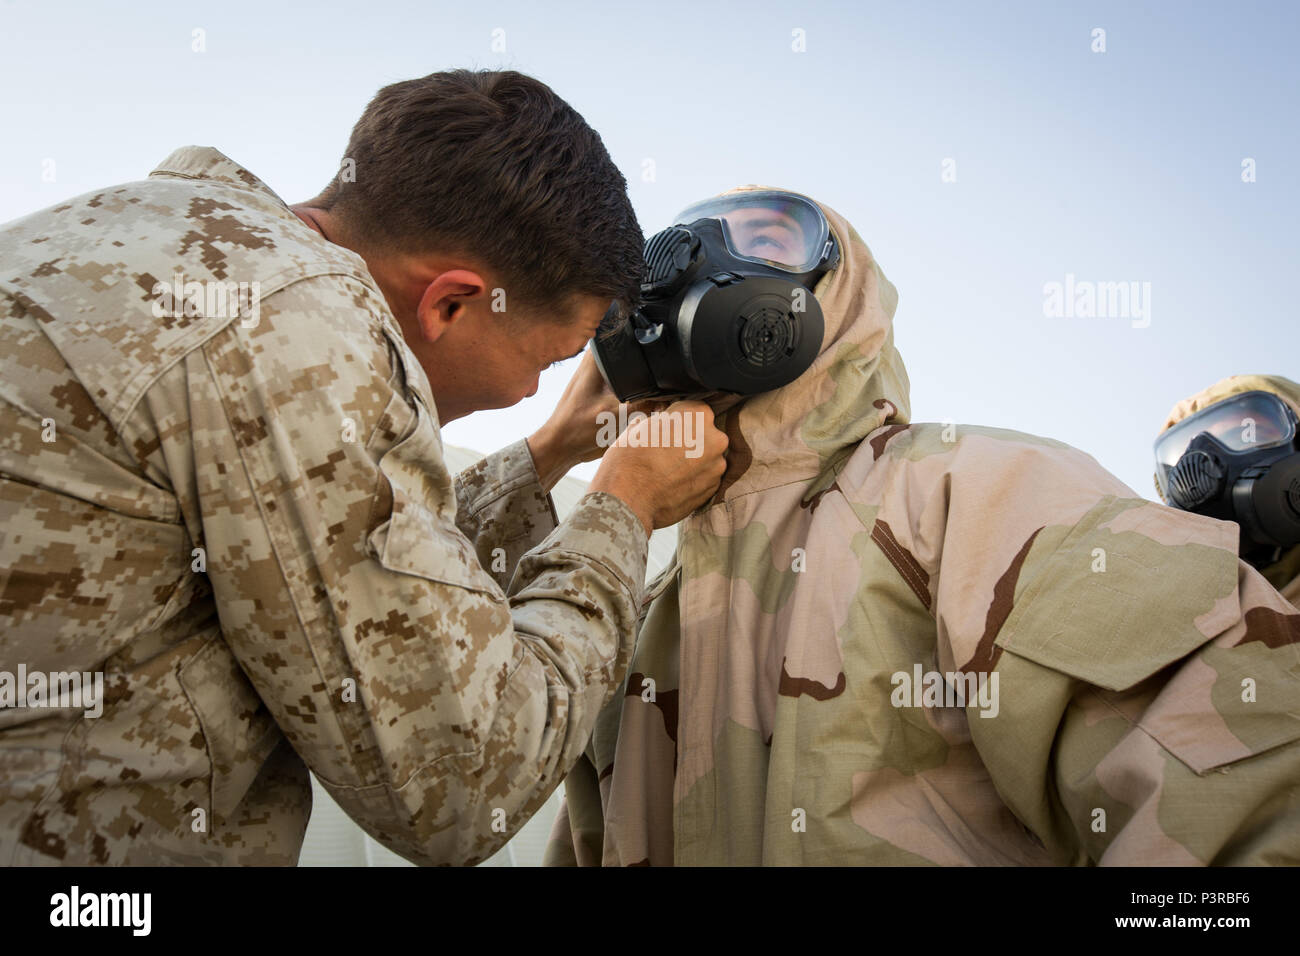 U.S. Marine Cpl. Travis Knigge, left, a Chemical, Biological, Radiological and Nuclear Defense specialist with Special Purpose Marine Air-Ground Task Force - Crisis Response - Central Command, inspects a Marine’s gas mask during a Reconnaissance, Surveillance and Decontamination course run by Chemical, Biological, Radiological and Nuclear Defense Marines while forward deployed, July 16, 2016. SPMAGTF-CR-CC is a crisis response unit that has the ability to project combat power throughout the Central Command area of responsibility, using organic aviation, logistical, and ground combat assets. (U Stock Photo